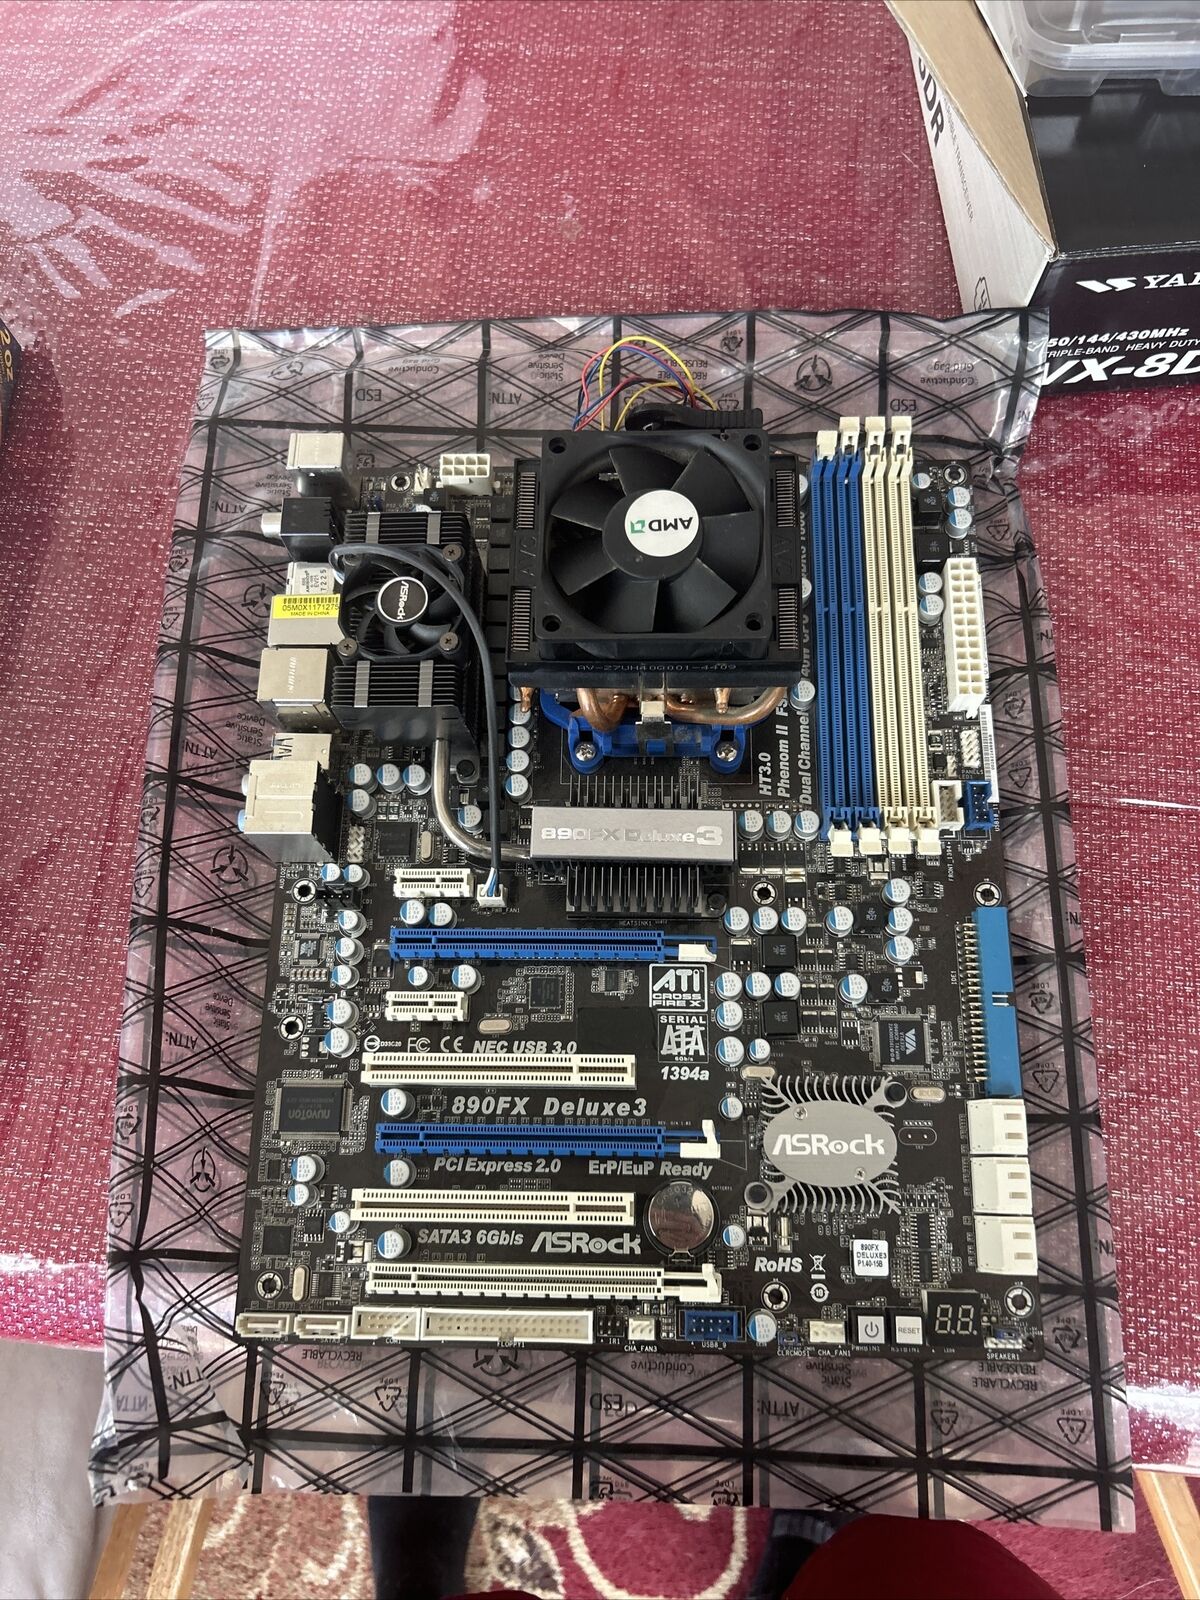 ASROCK 890FX DELUXE 3 Including Processor And Heatsink (AS IS)